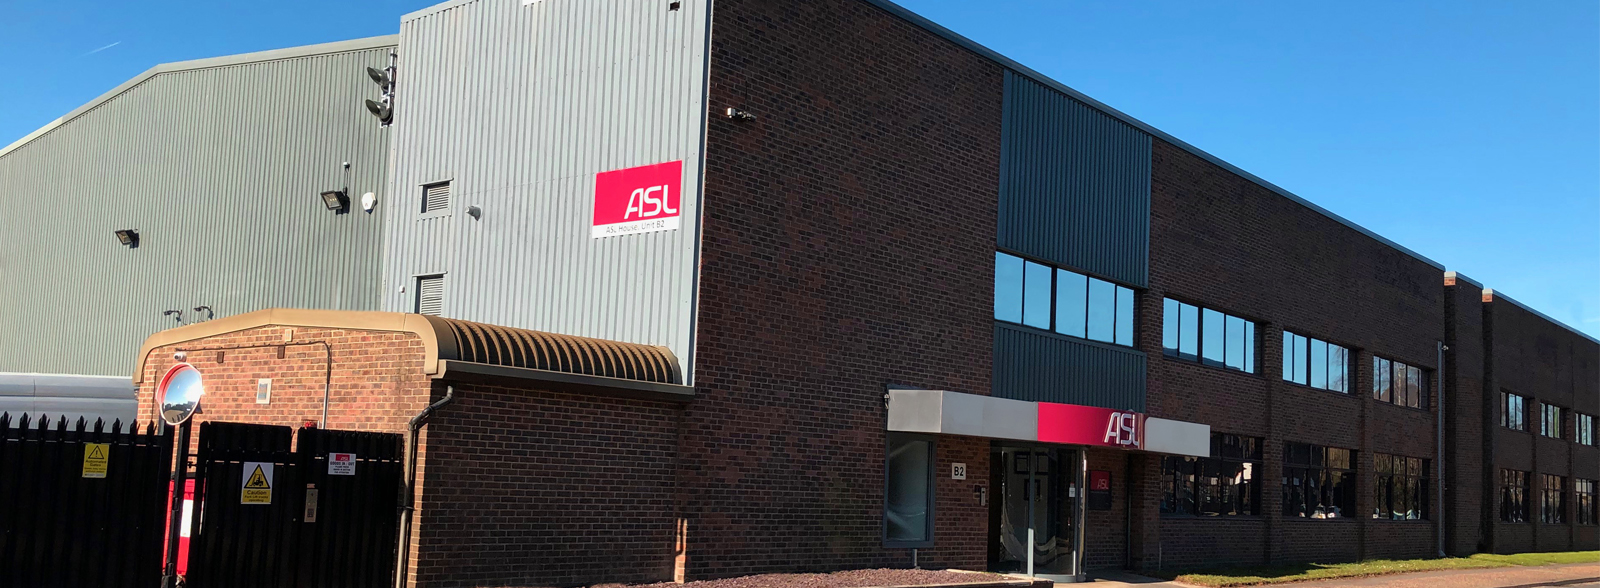 ASL Head Office is between the UK airports of Heathrow and Gatwick, dispatching aircraft spare parts for sale – within 1 hour, call 44 (0) 1403 220550.